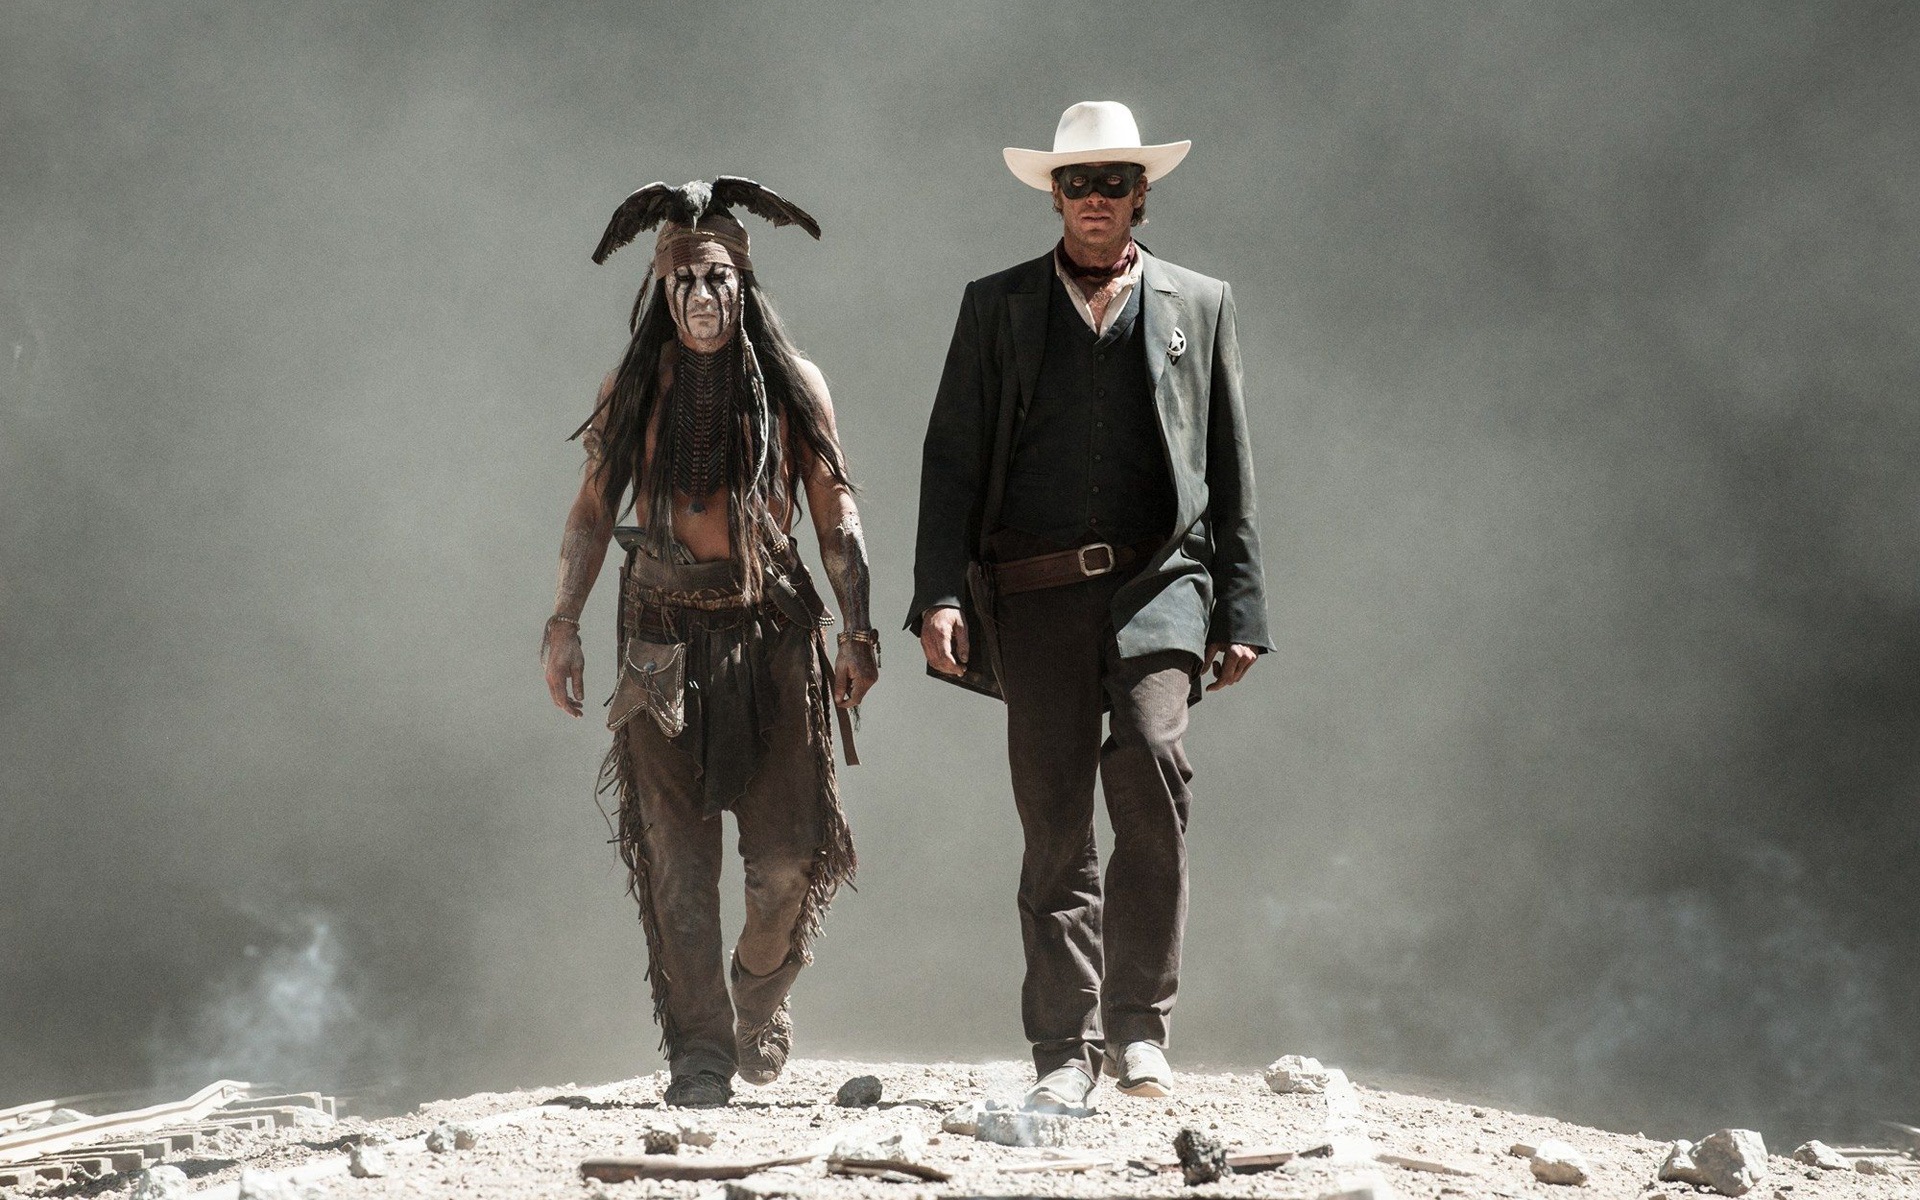 The Lone Ranger HD movie wallpapers #4 - 1920x1200